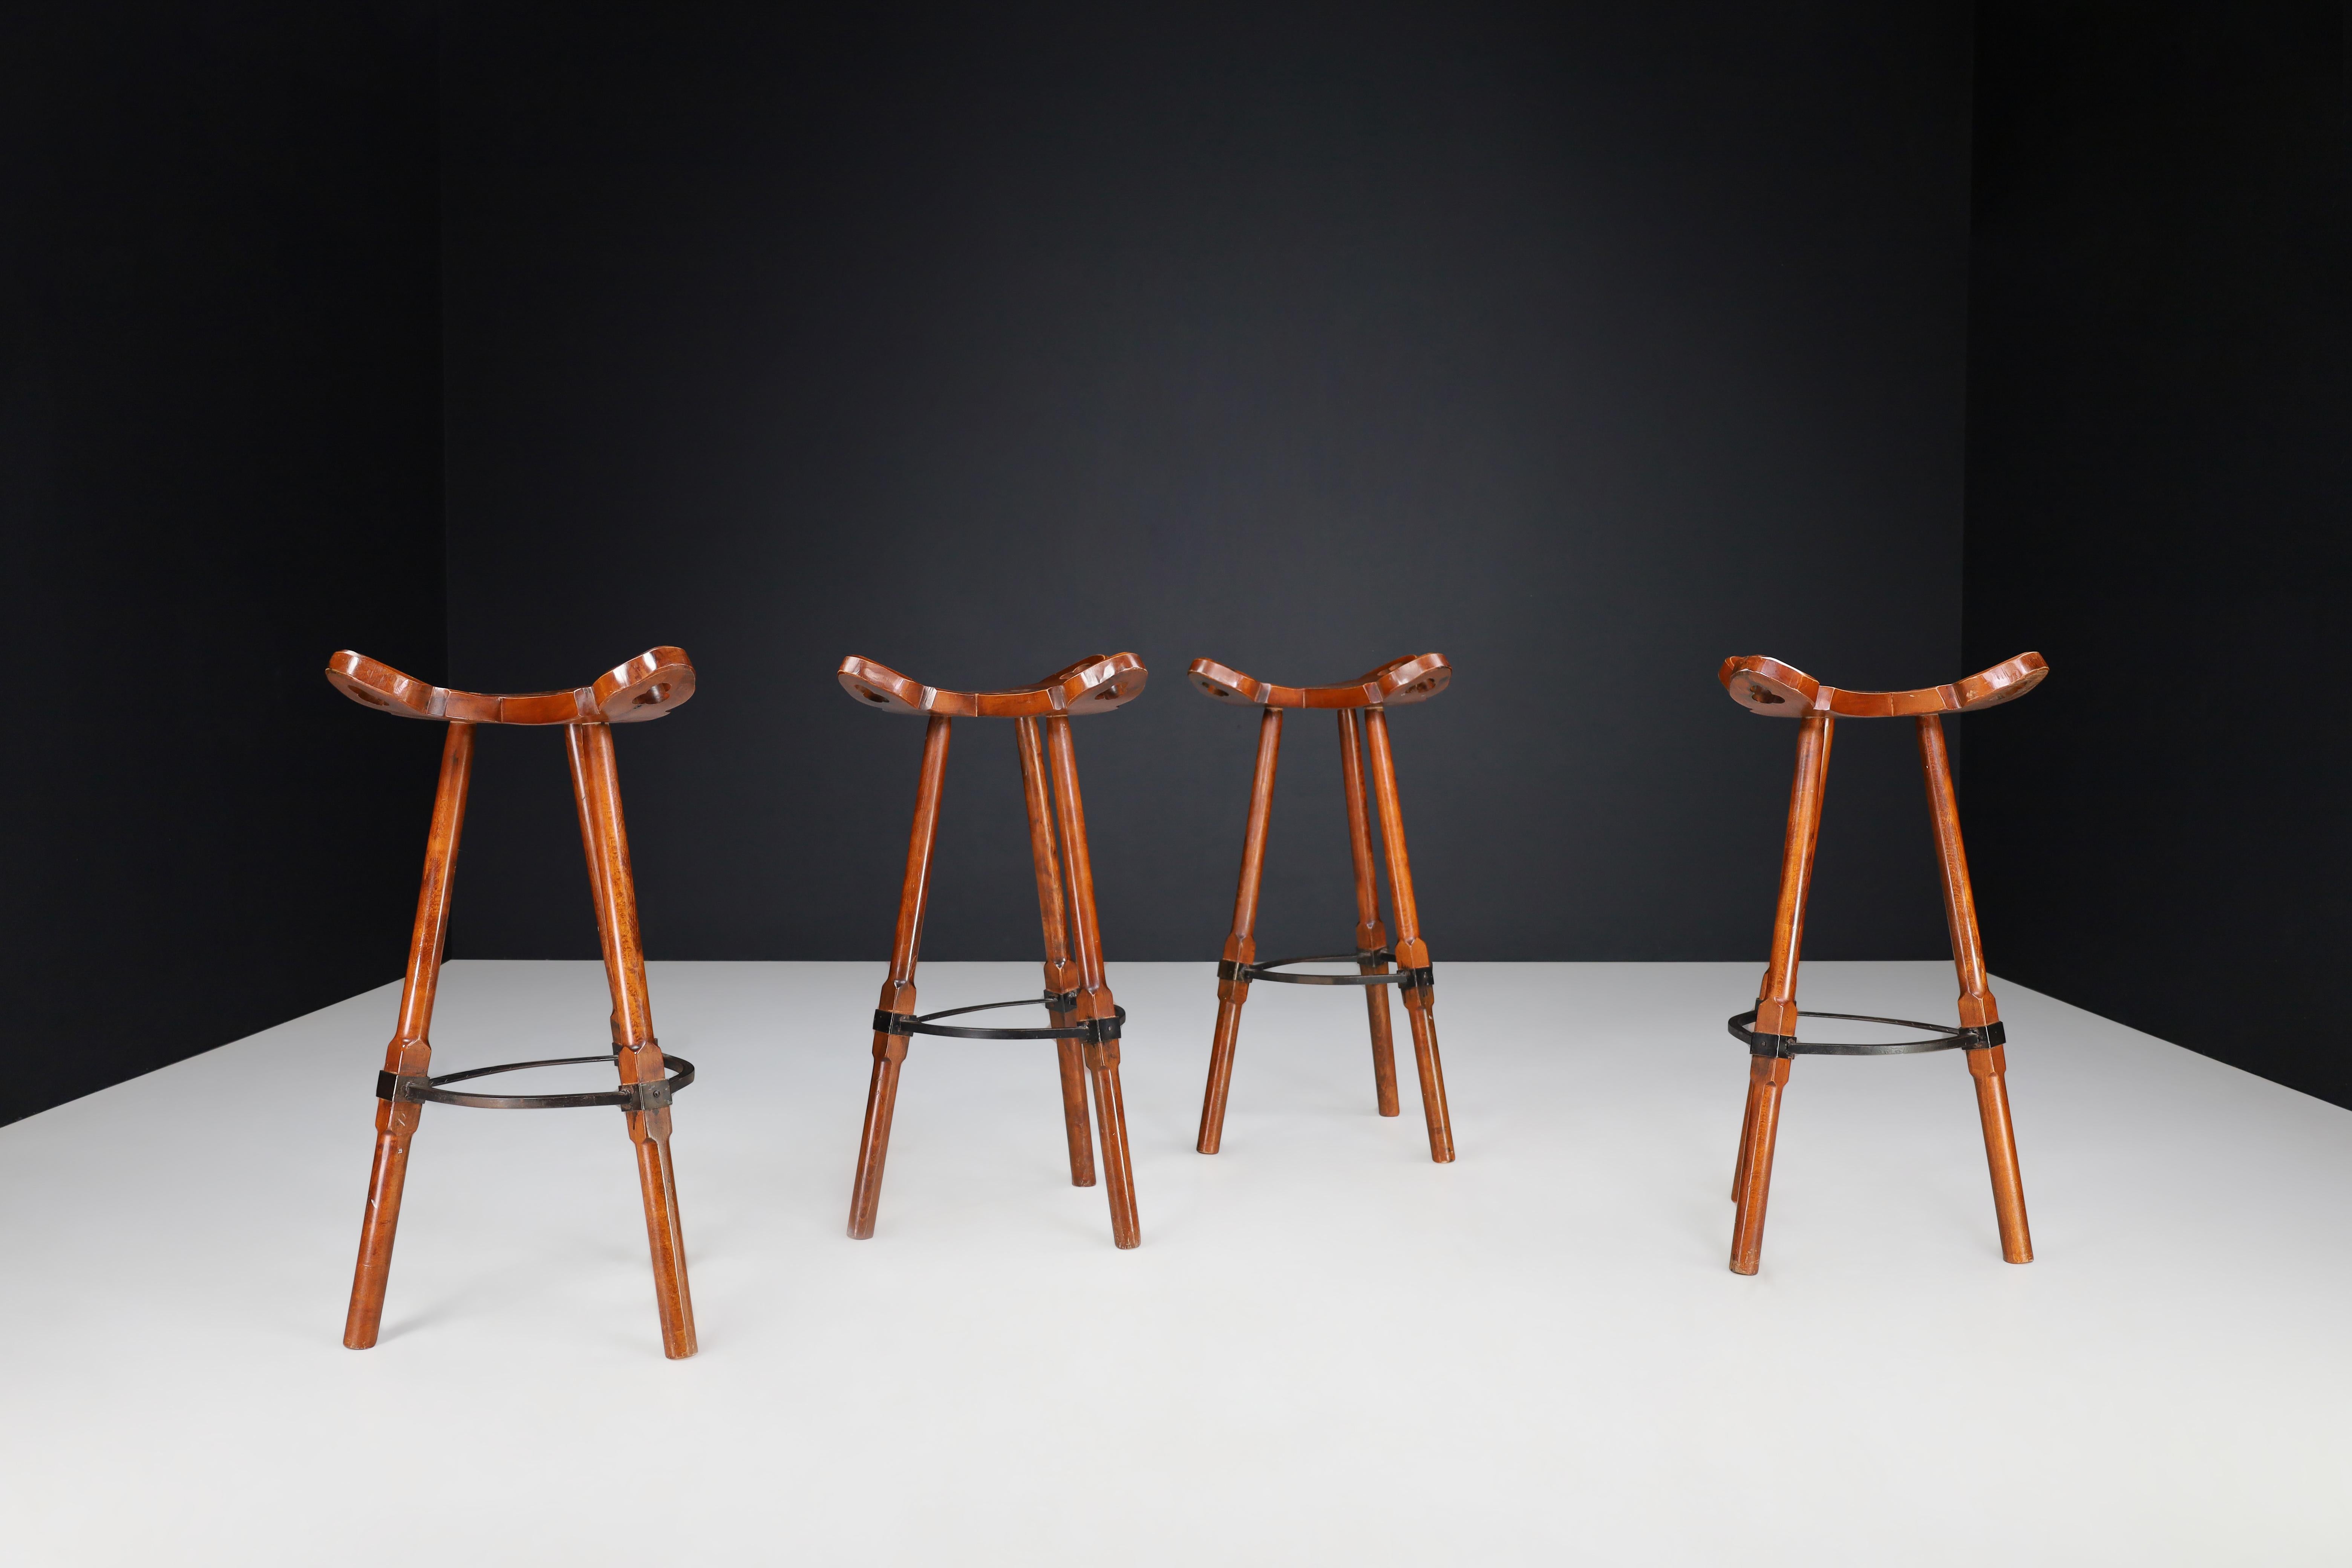 Brutalist Stained Beech Bar Stools, Spain, 1970s

This set of four 1970 Spanish bar stools is a must-have for any home. Made of stained beech and metal, they boast a unique curved T-shape, three handles for exceptional stability and comfort, and